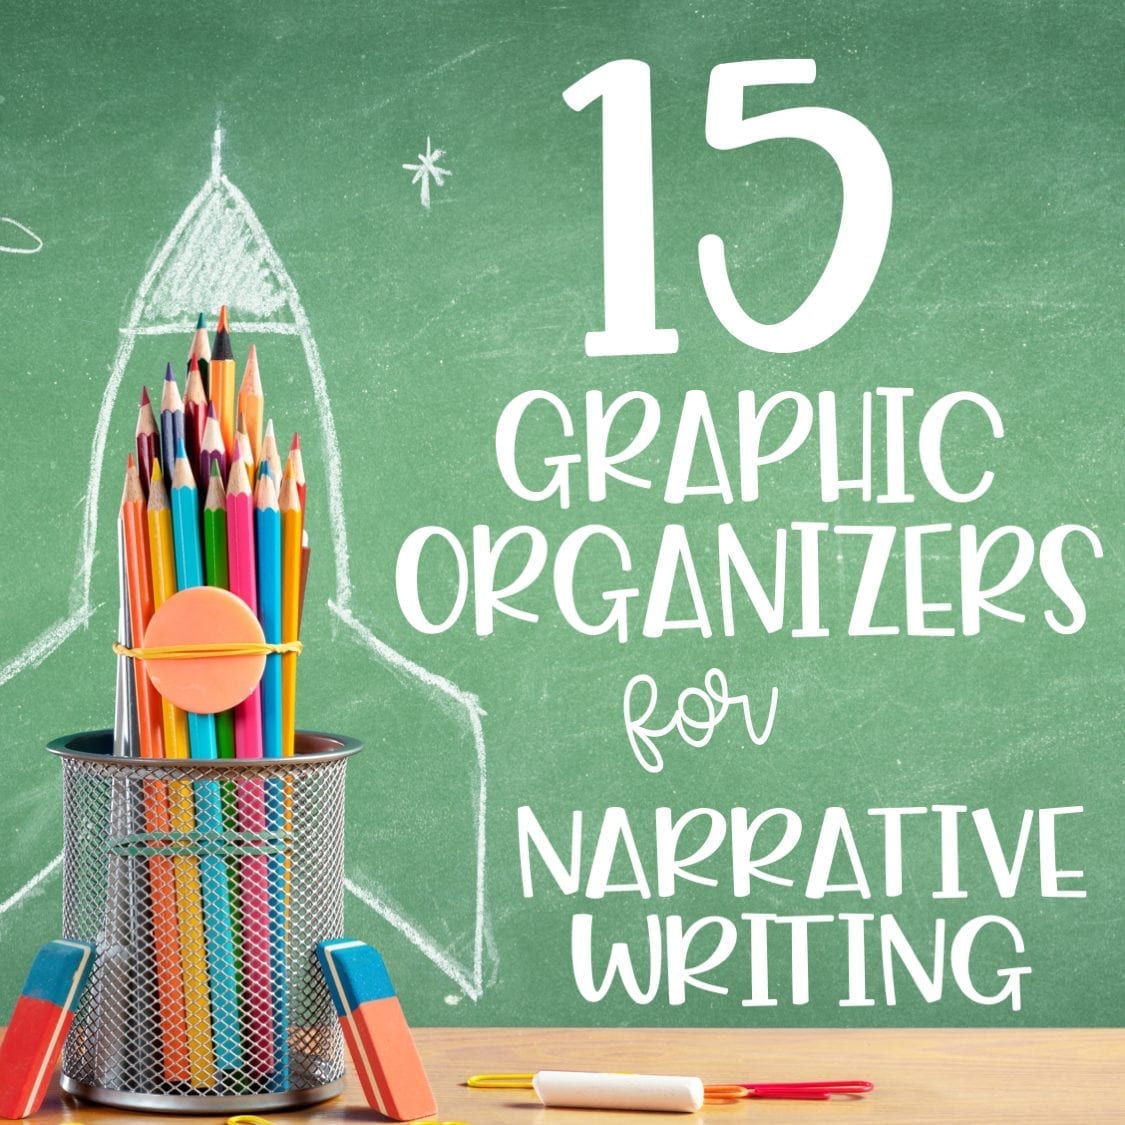 Graphic Organizers for Narrative Writing